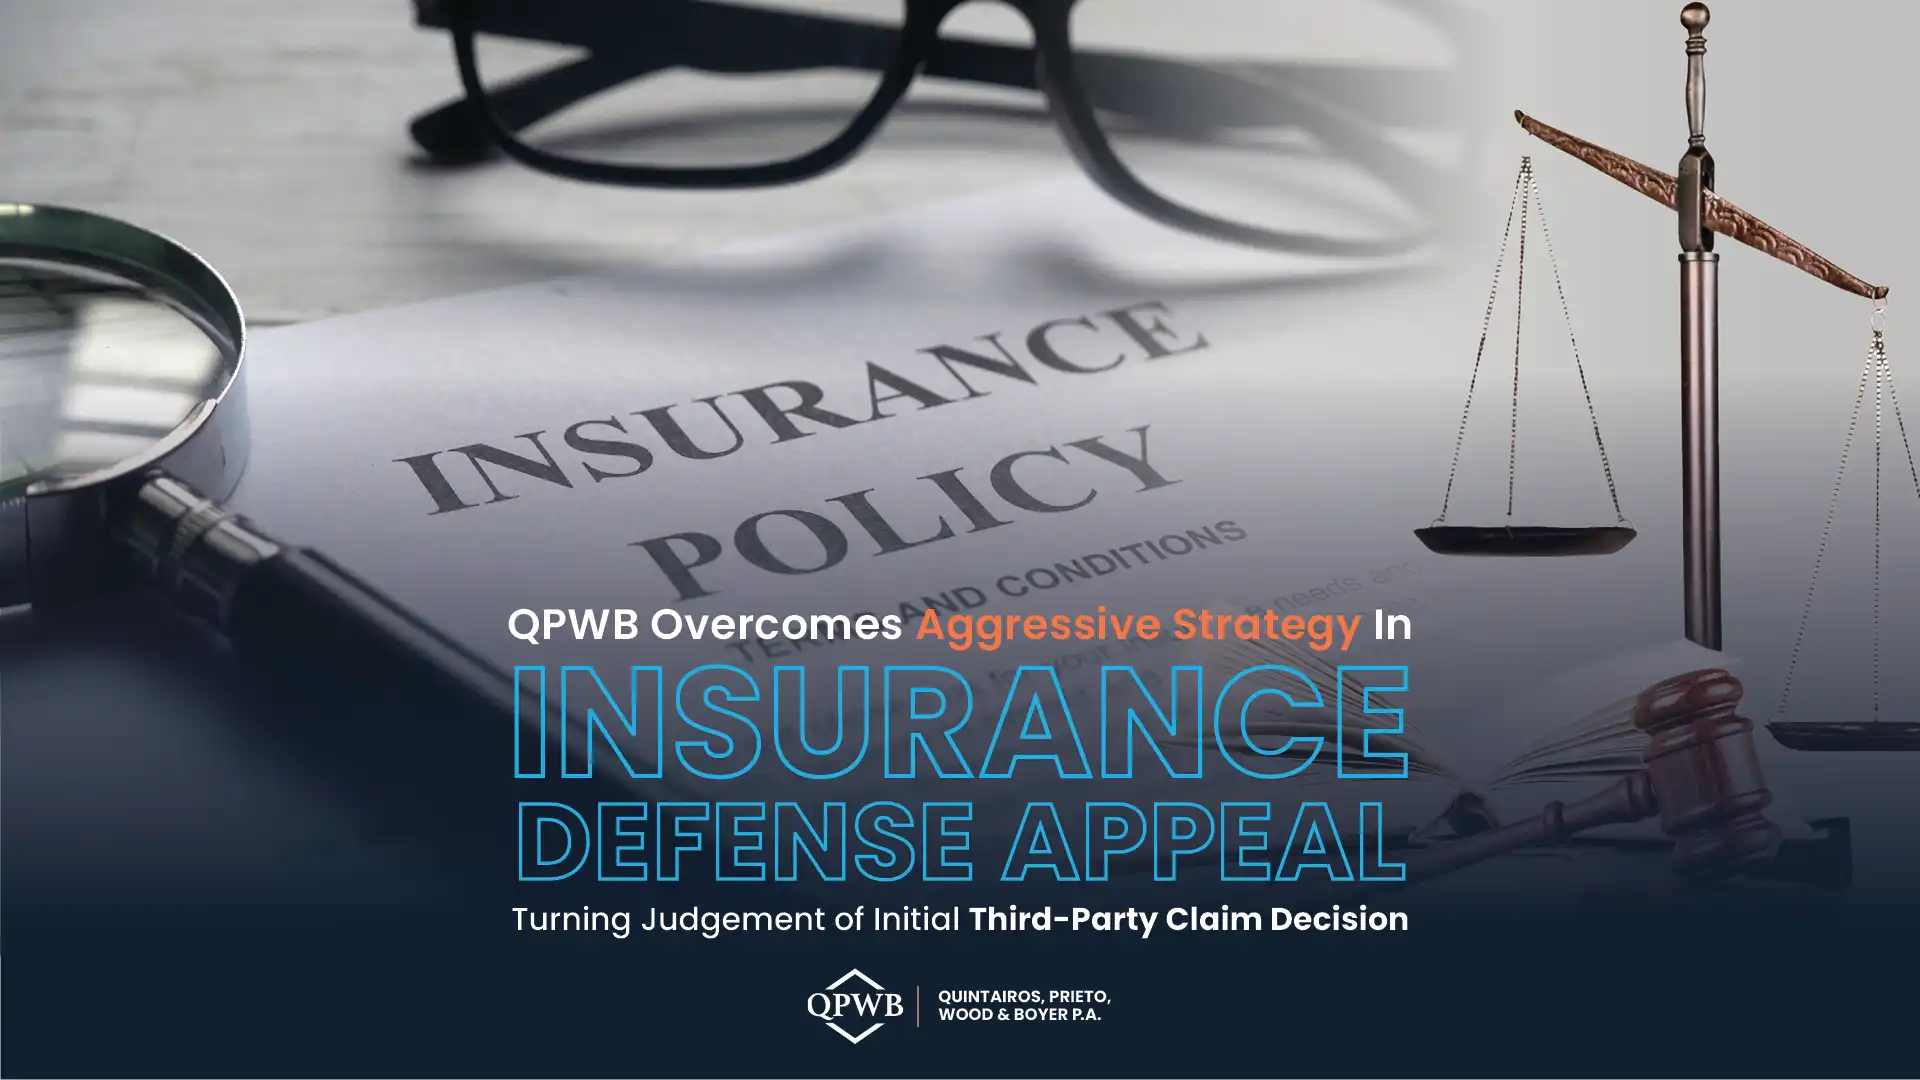 QPWB Overcomes Aggressive Strategy In Insurance Defense Appeal, Turning Judgement of Initial Third-Party Claim Decision